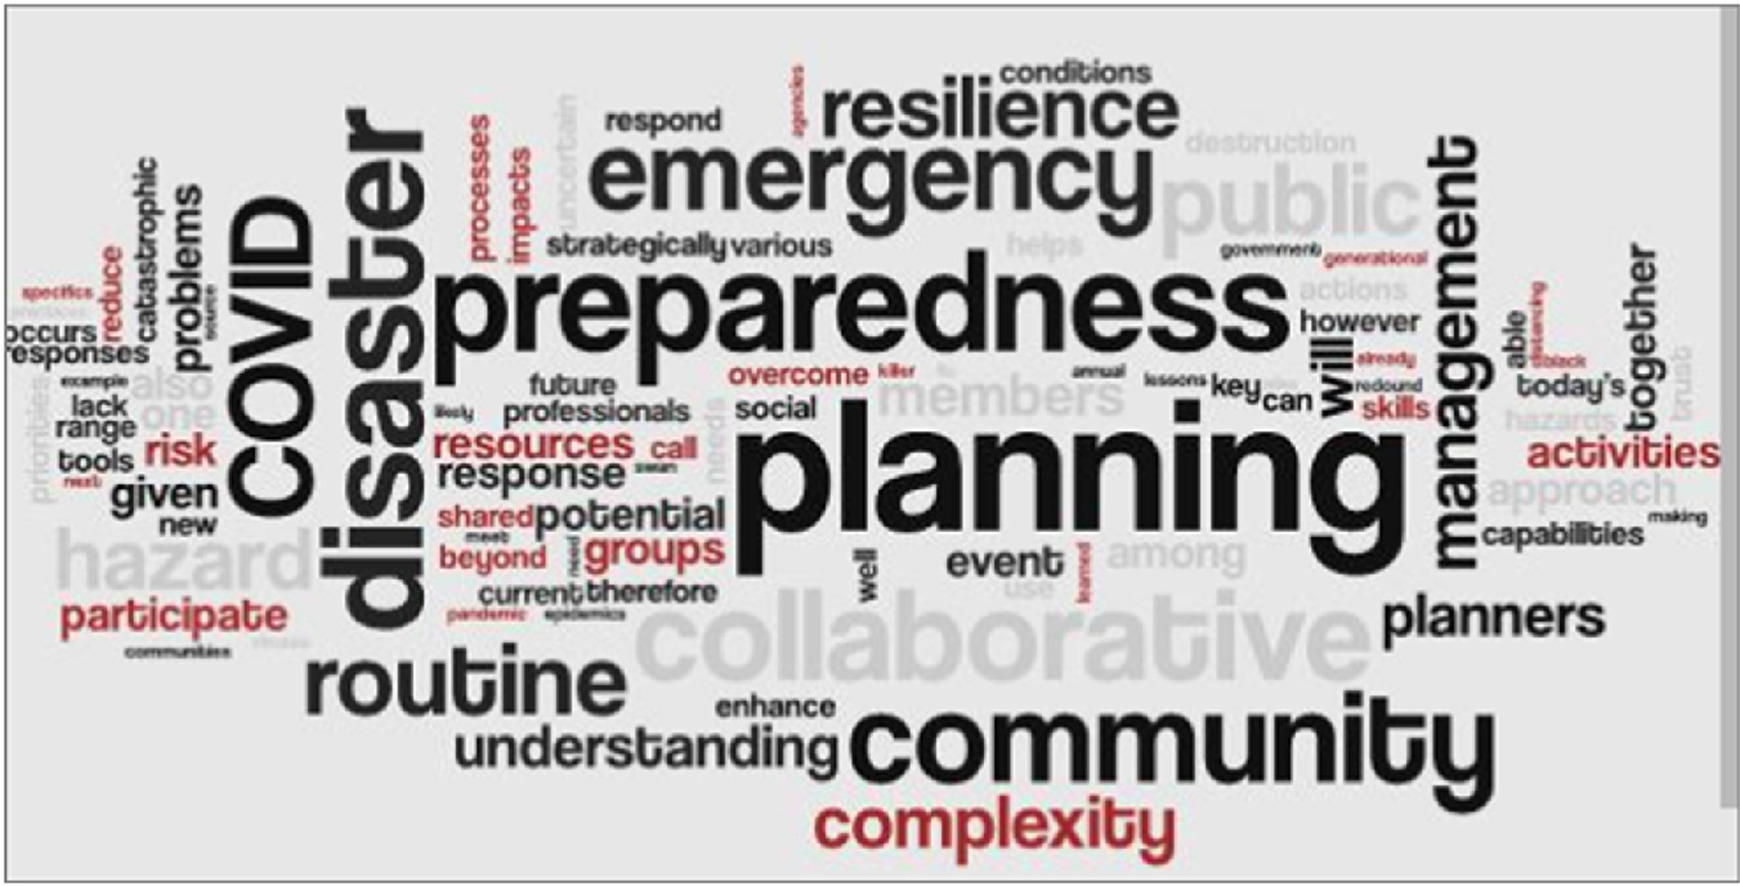 Corporate disaster prevention measures based on BCP : Business Continuity Plan